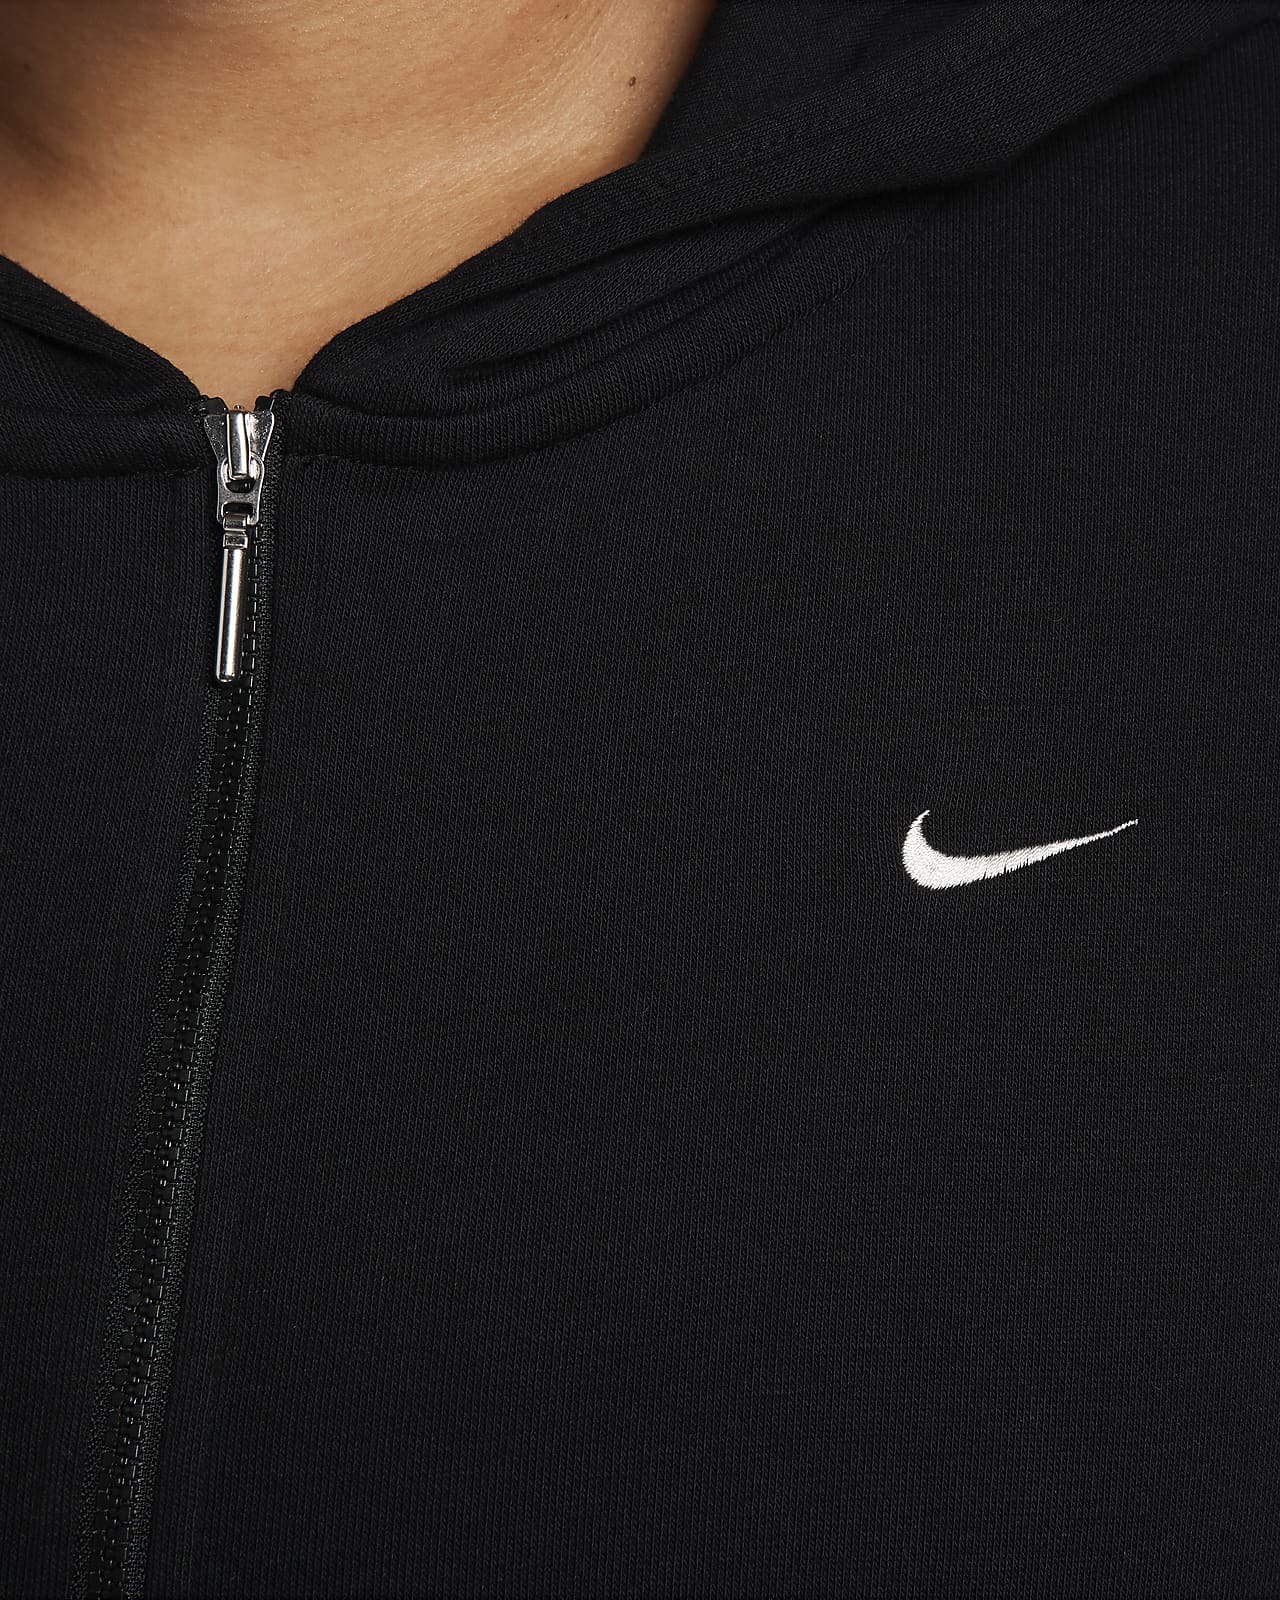 Nike Sportswear Chill Terry Women's Loose Full-Zip French Terry Hoodie  (Plus Size).